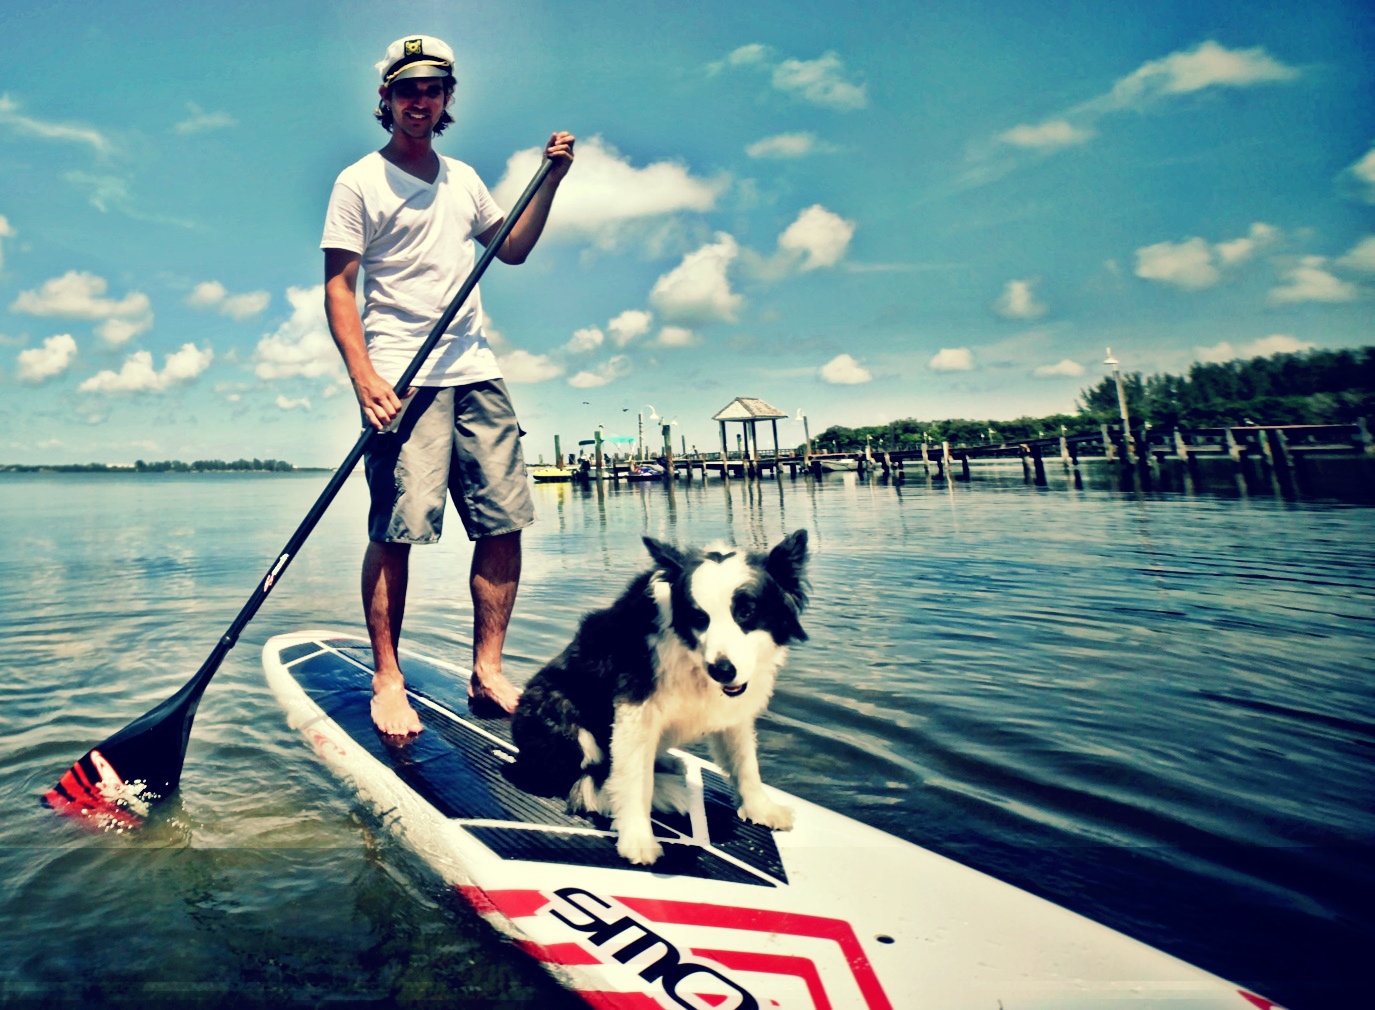 Toy trained his two dogs to paddle board with him off Gasparilla Island